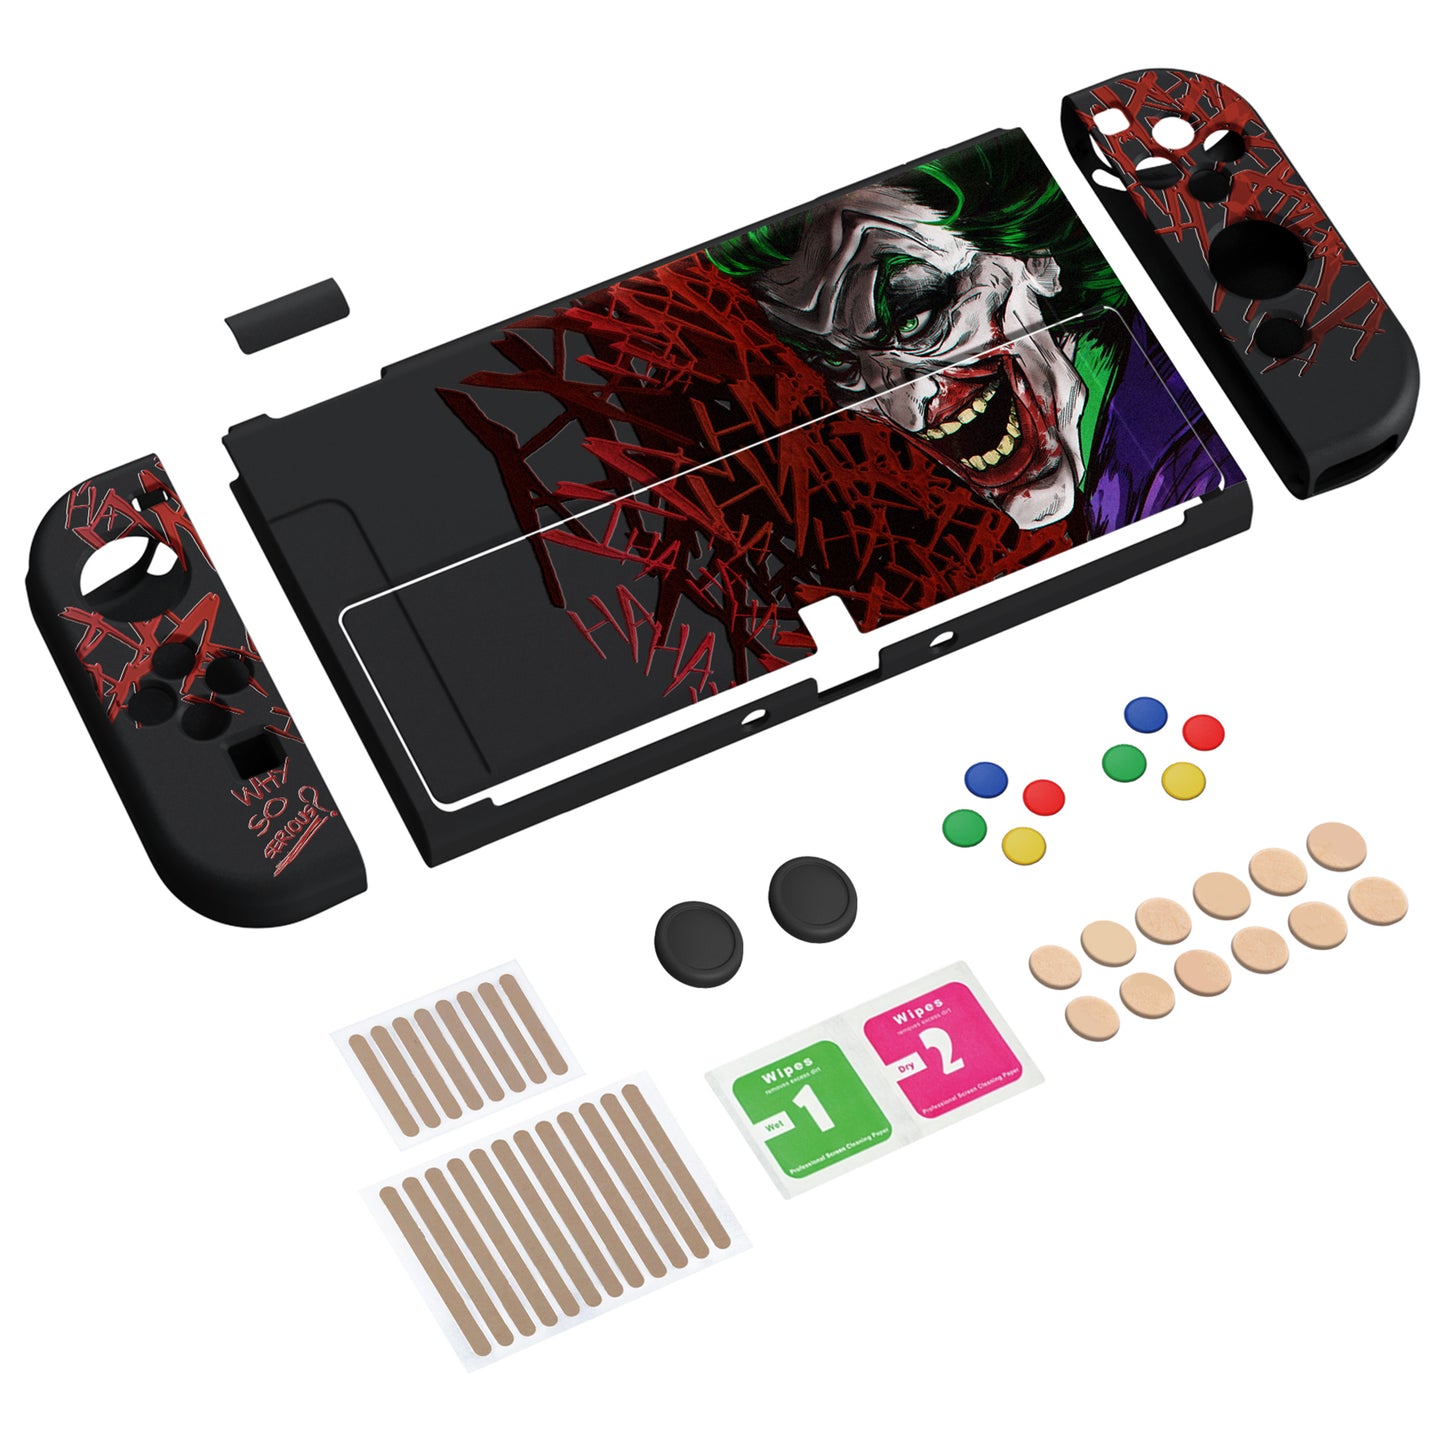 PlayVital ZealProtect Soft Protective Case for Switch OLED, Flexible Protector Joycon Grip Cover for Switch OLED with Thumb Grip Caps & ABXY Direction Button Caps - Clown Hahaha - XSOYV6029 playvital